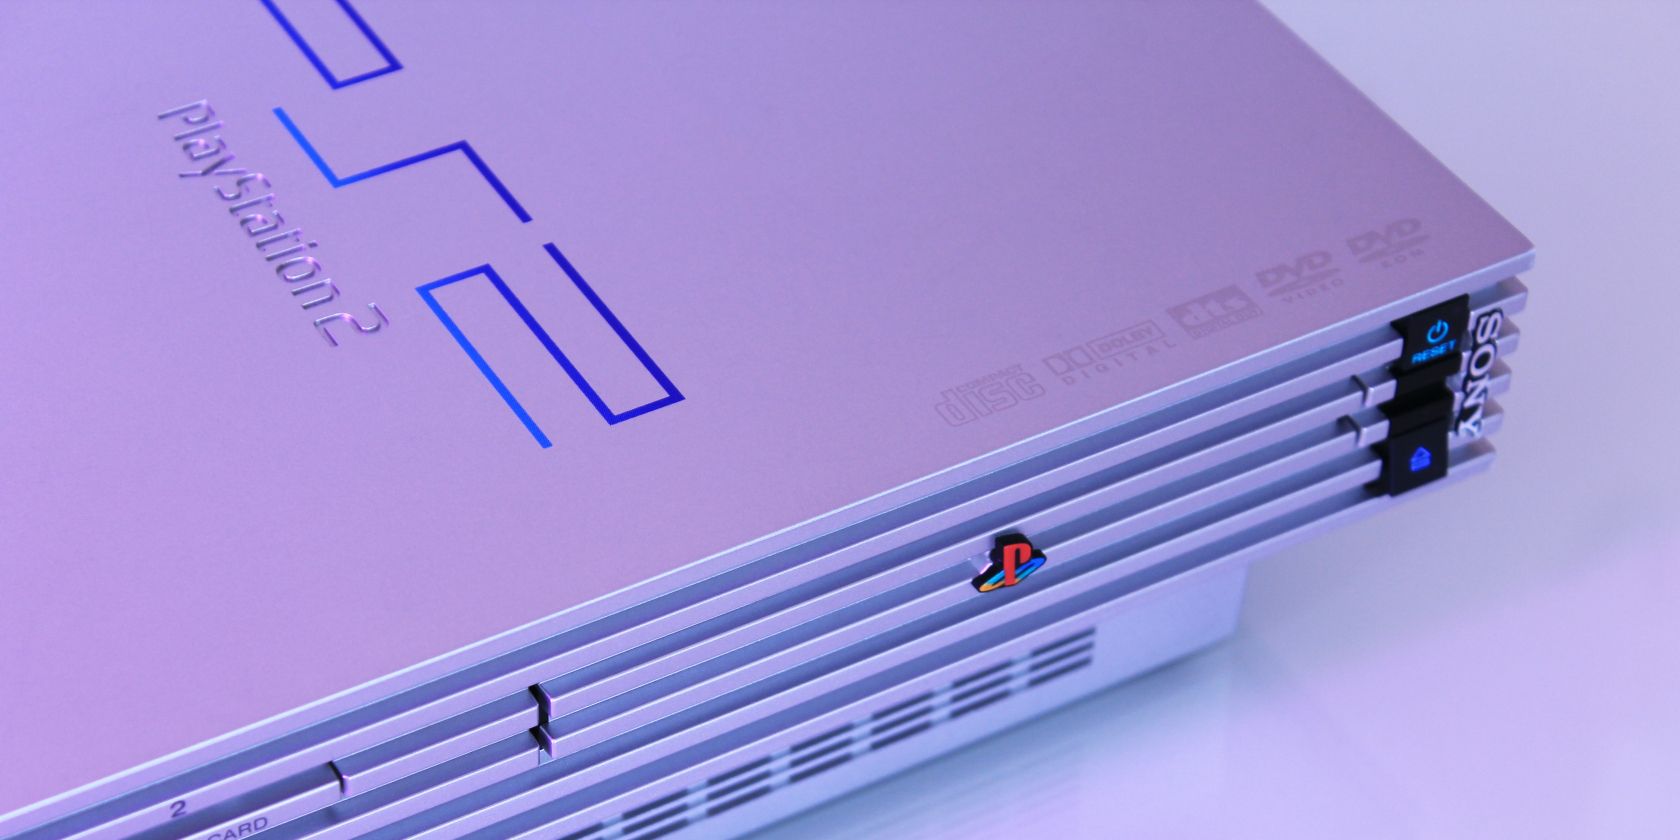 8 Reasons Why the PS2 Is the Best Console of All Time